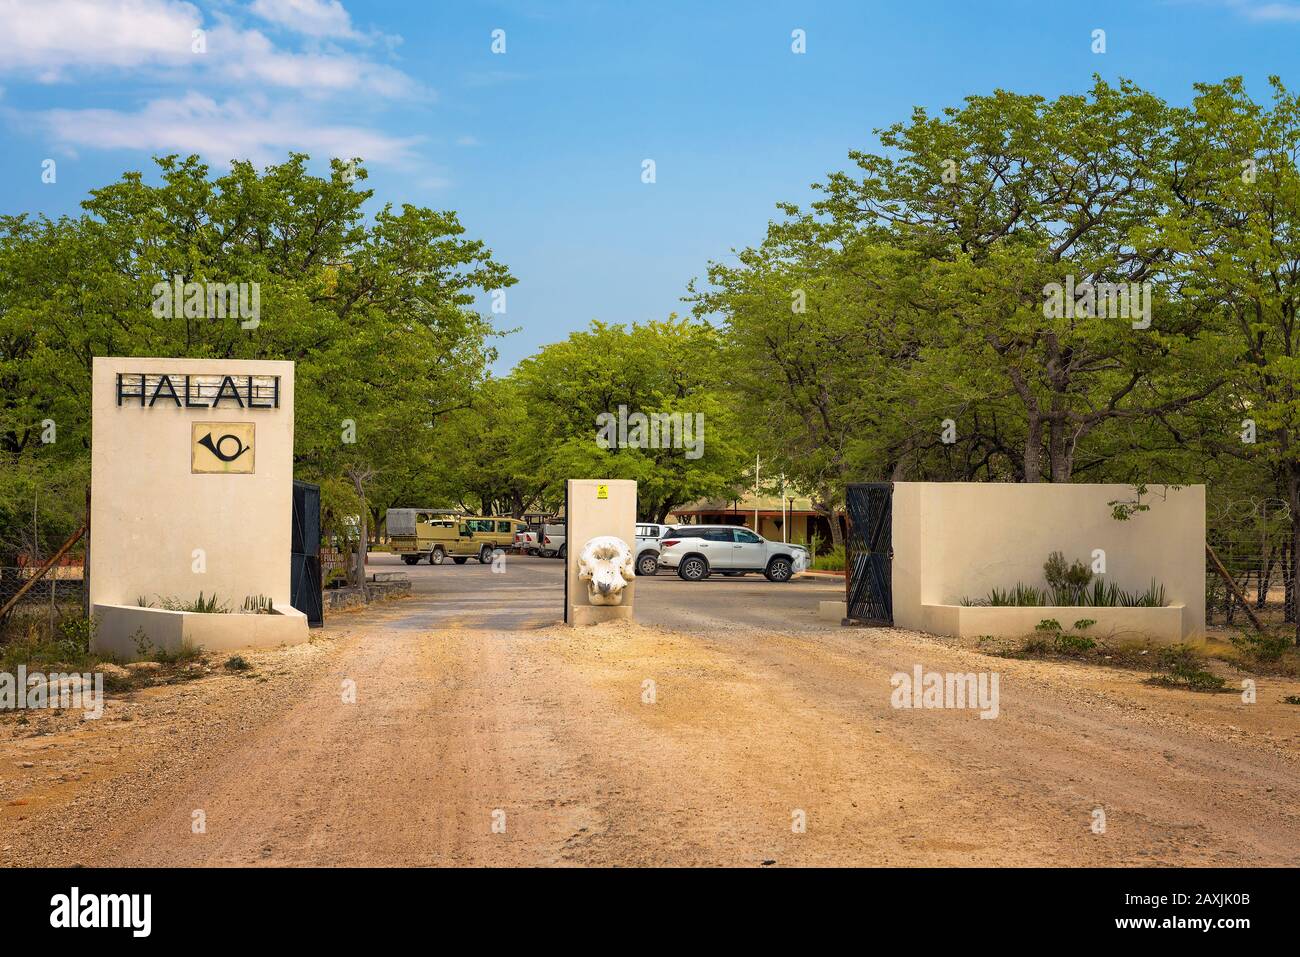 Entry gate of the Halali resort and campsite in Etosha National Park Stock Photo